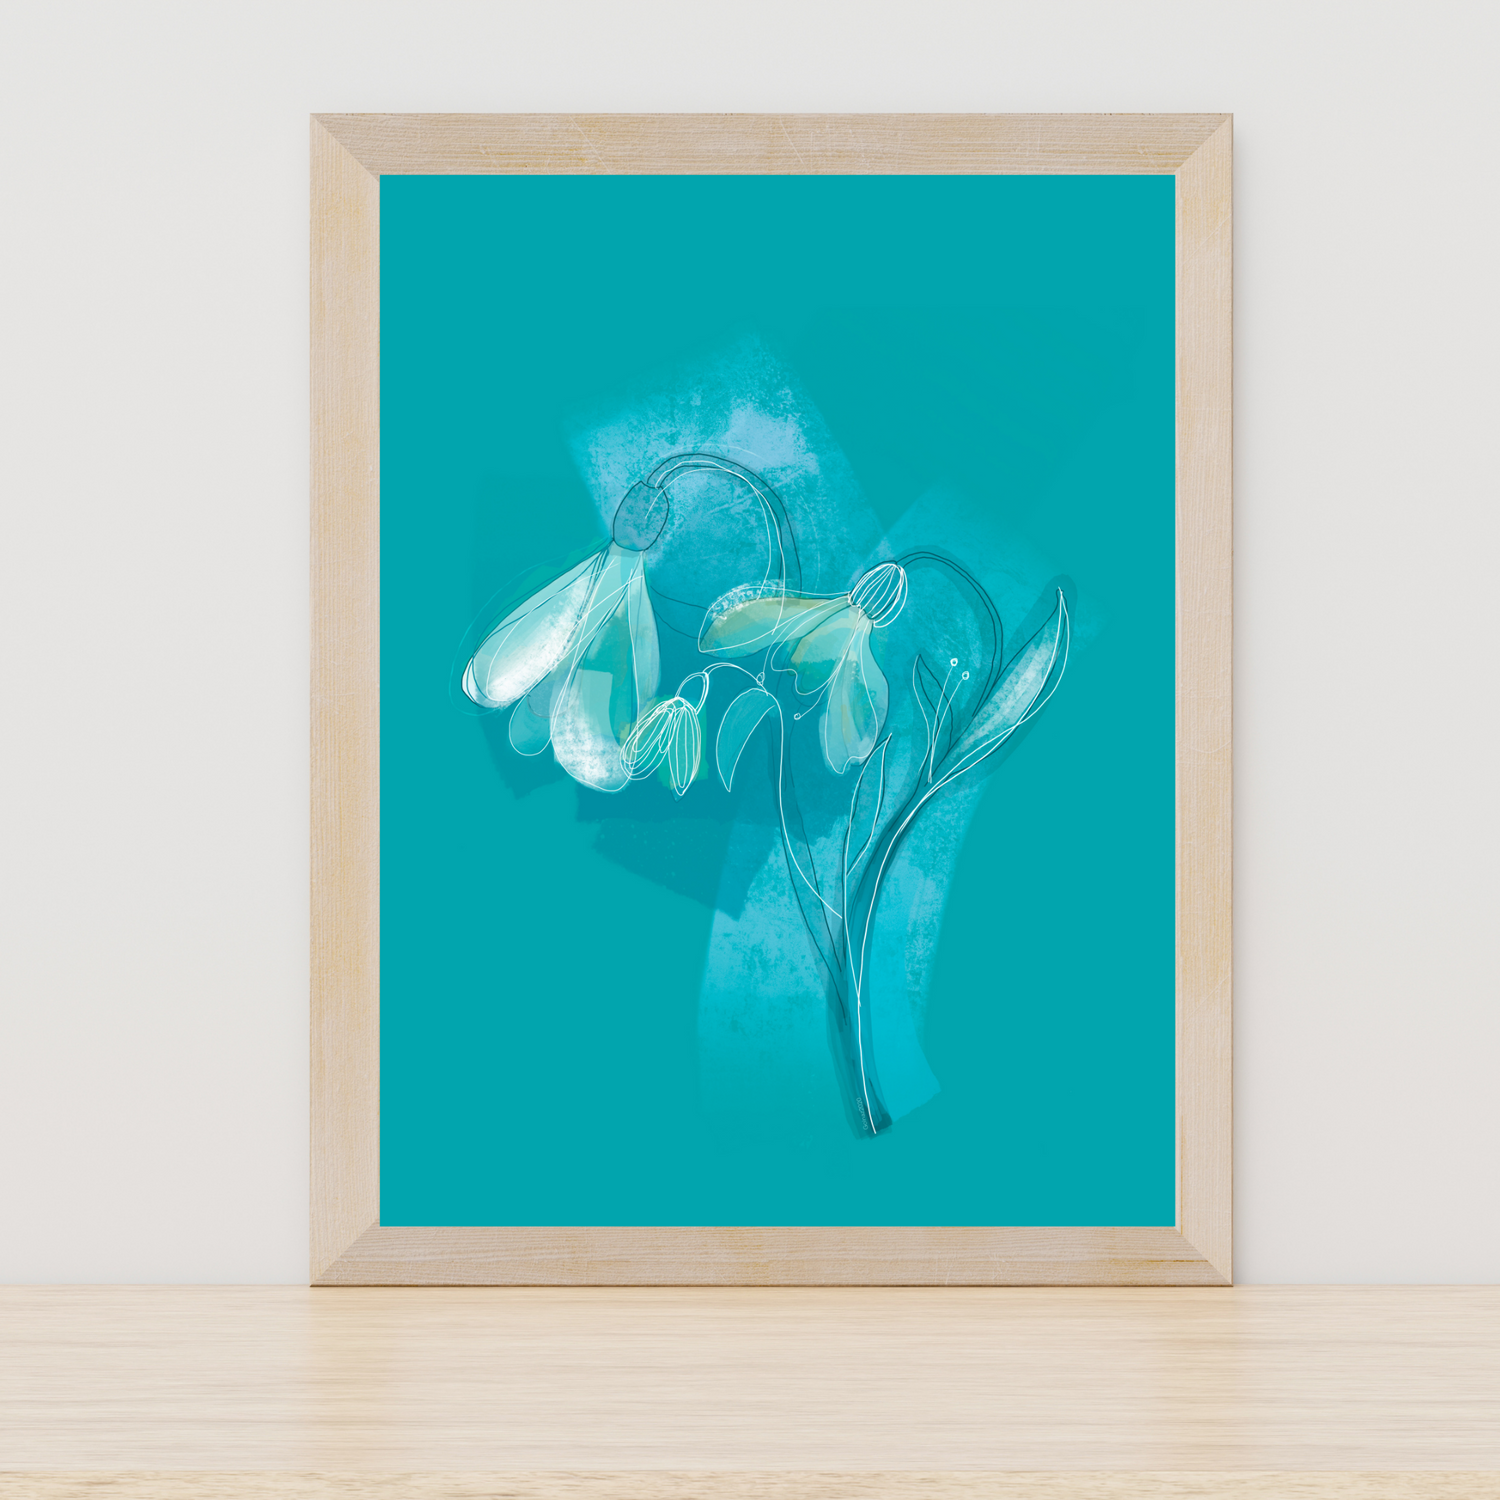 The Snowdrop painting by ArisaTeam